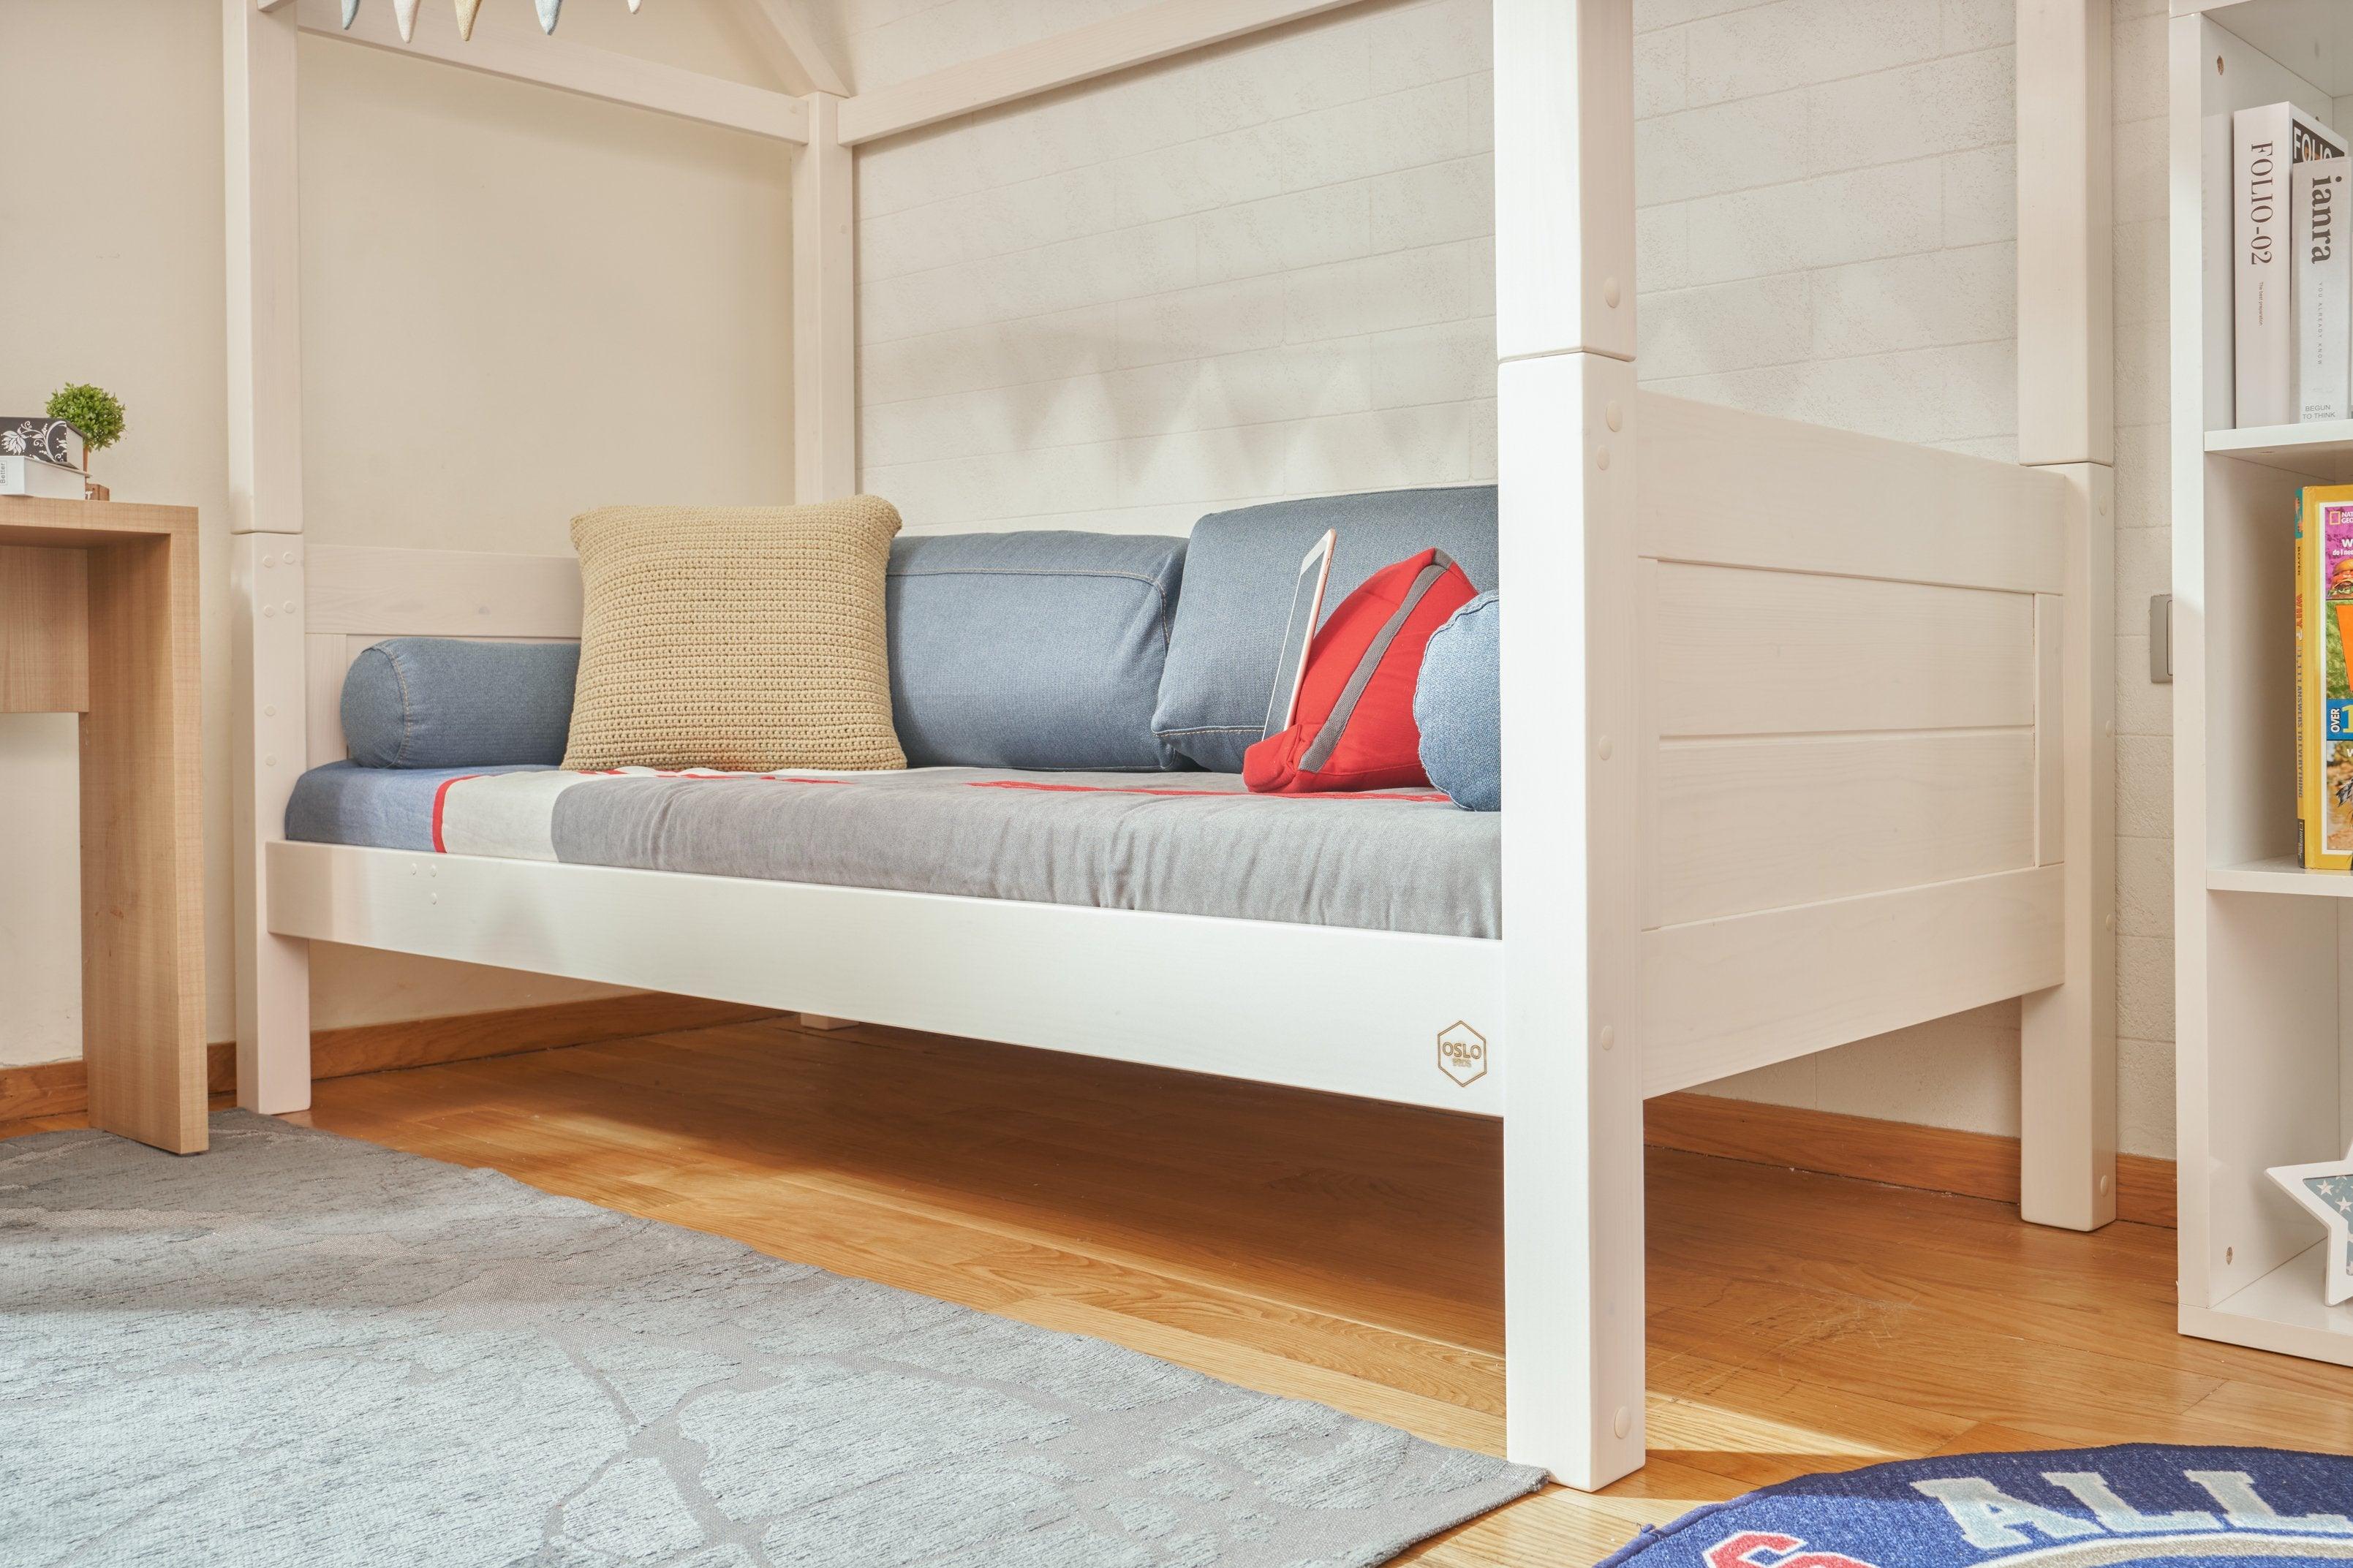 ModBed Elevated House Bed (with pullout options - Single or SS) - Kids Haven